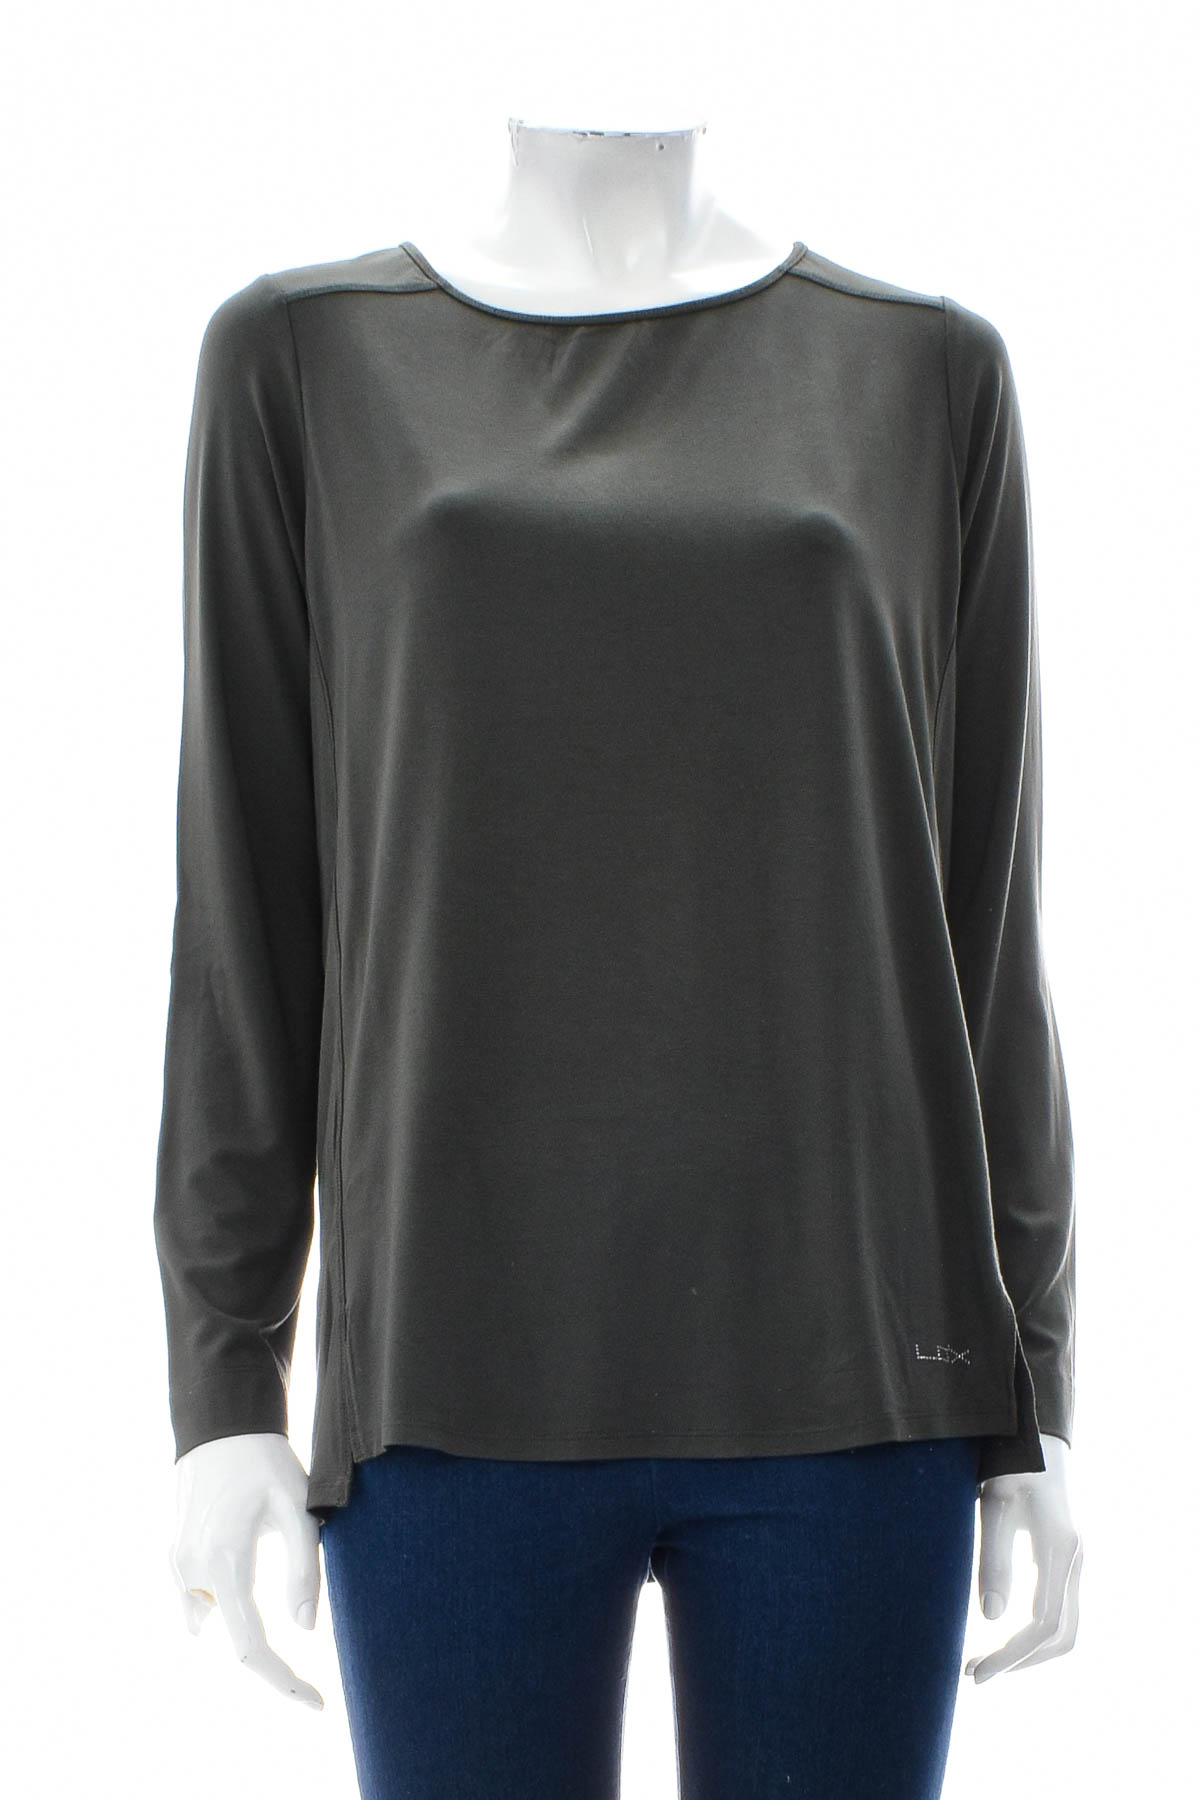 Women's blouse - Looxent - 0